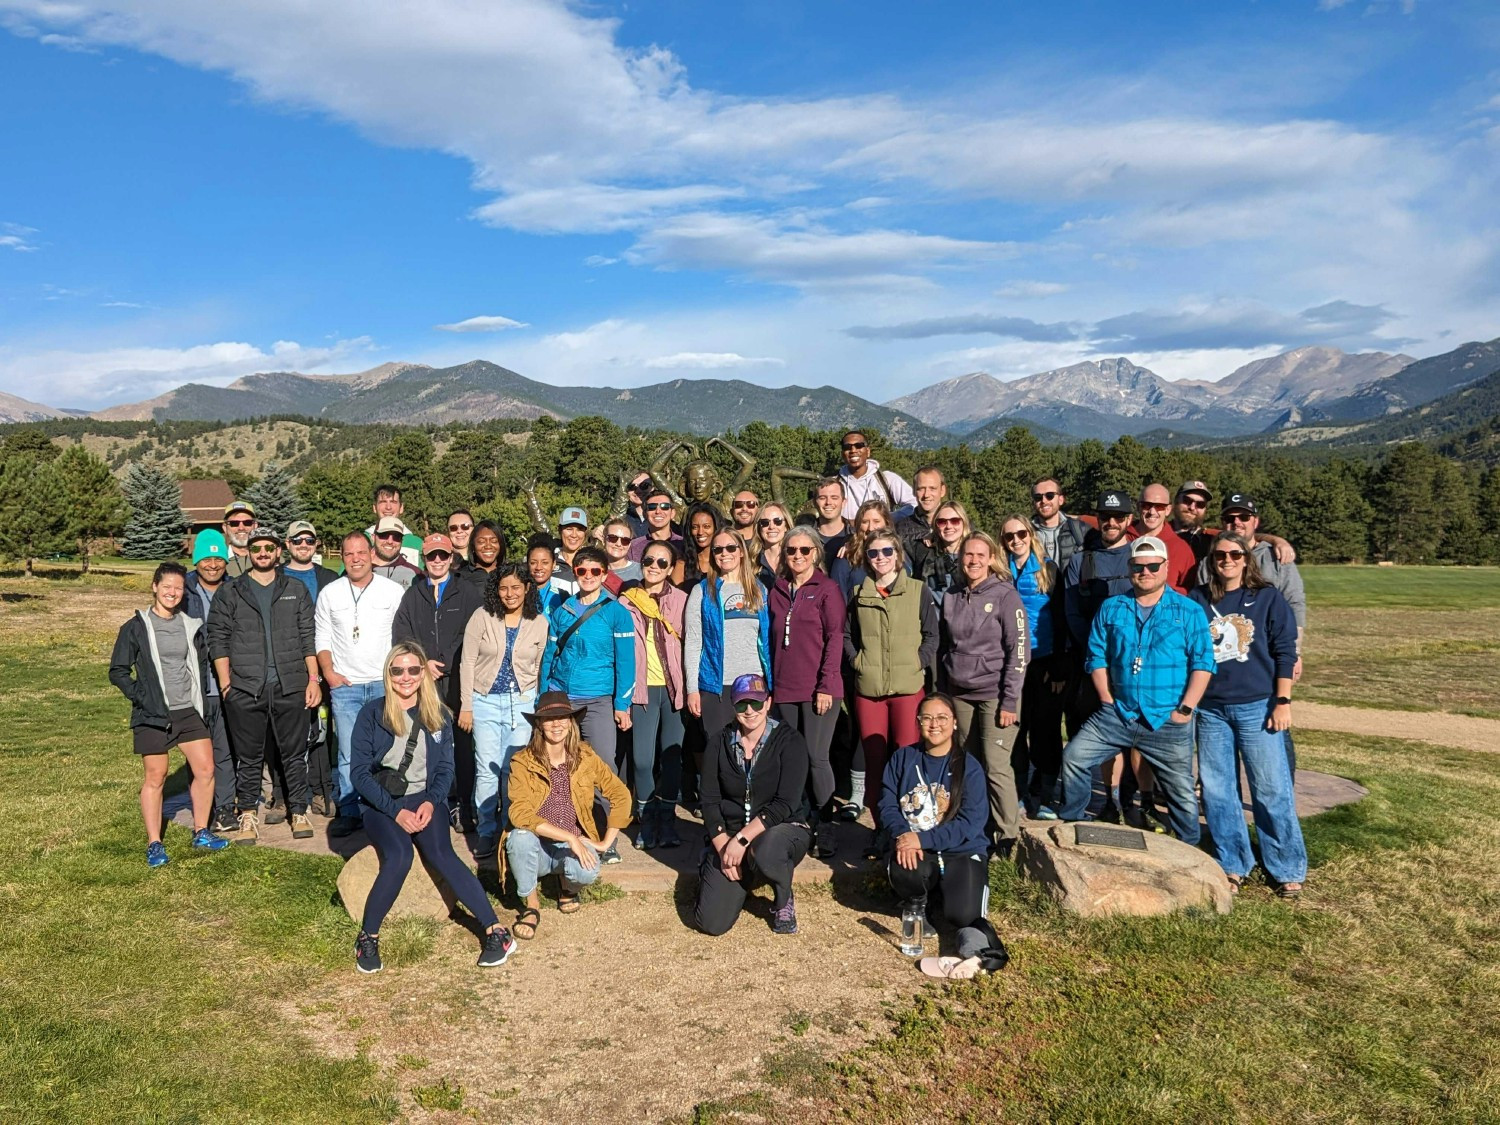 Propeller employees across our markets gather for in-person connection at our annual offsite